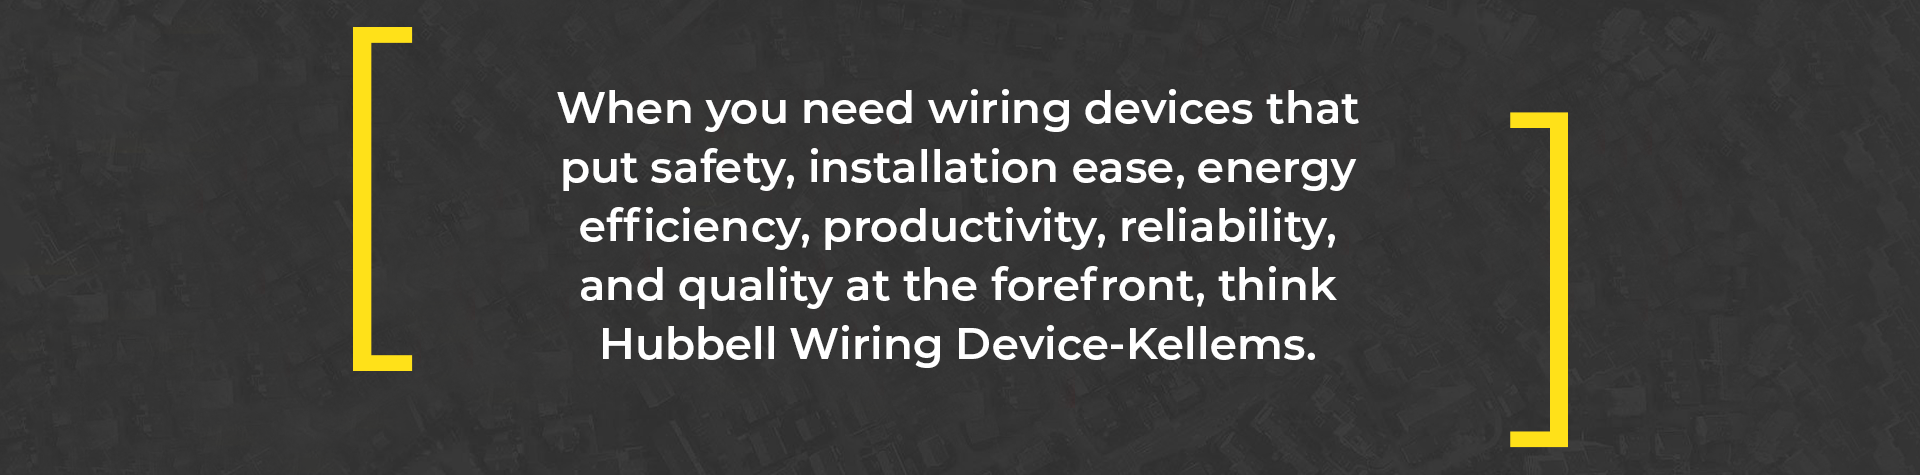 Hubbell Wiring Device Kellems Banner